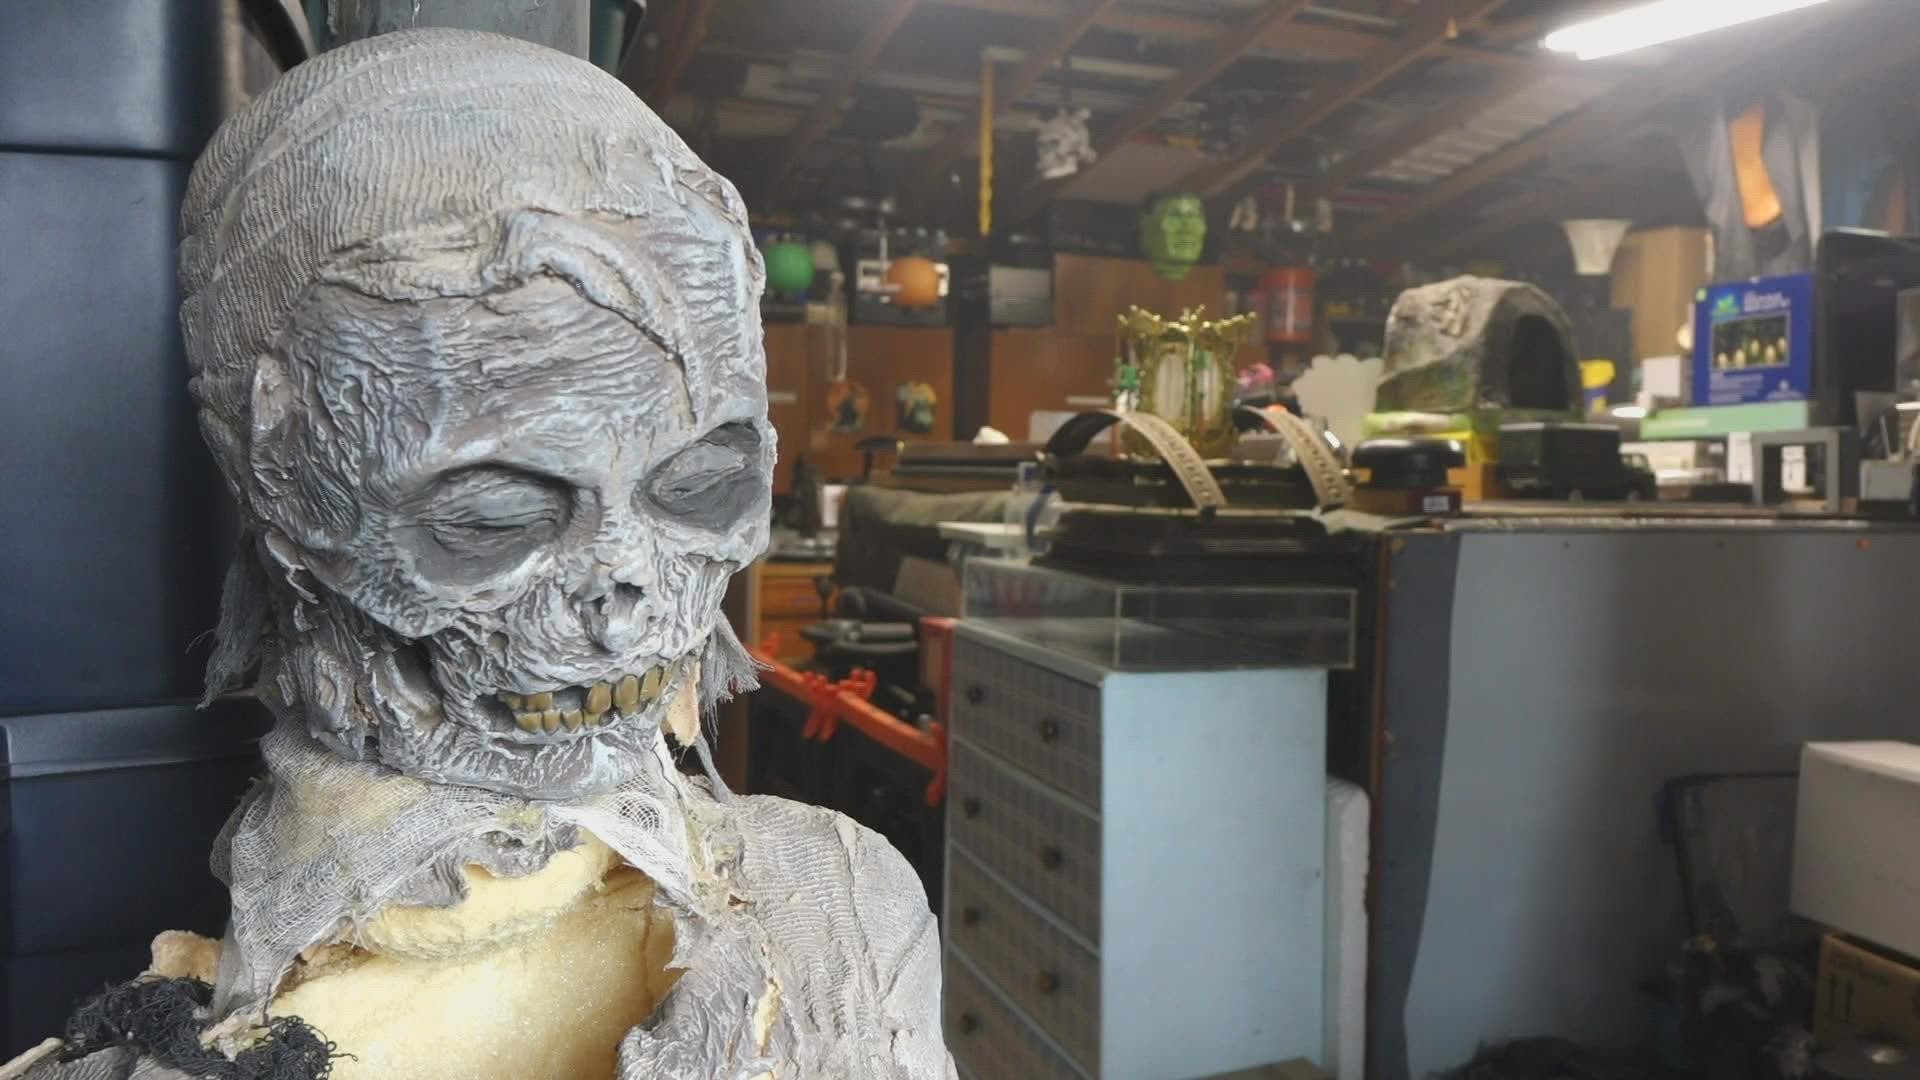 The family transformed their garage into a huge haunted attraction that delivers scares and some nostalgia all year long in celebration of Halloween.